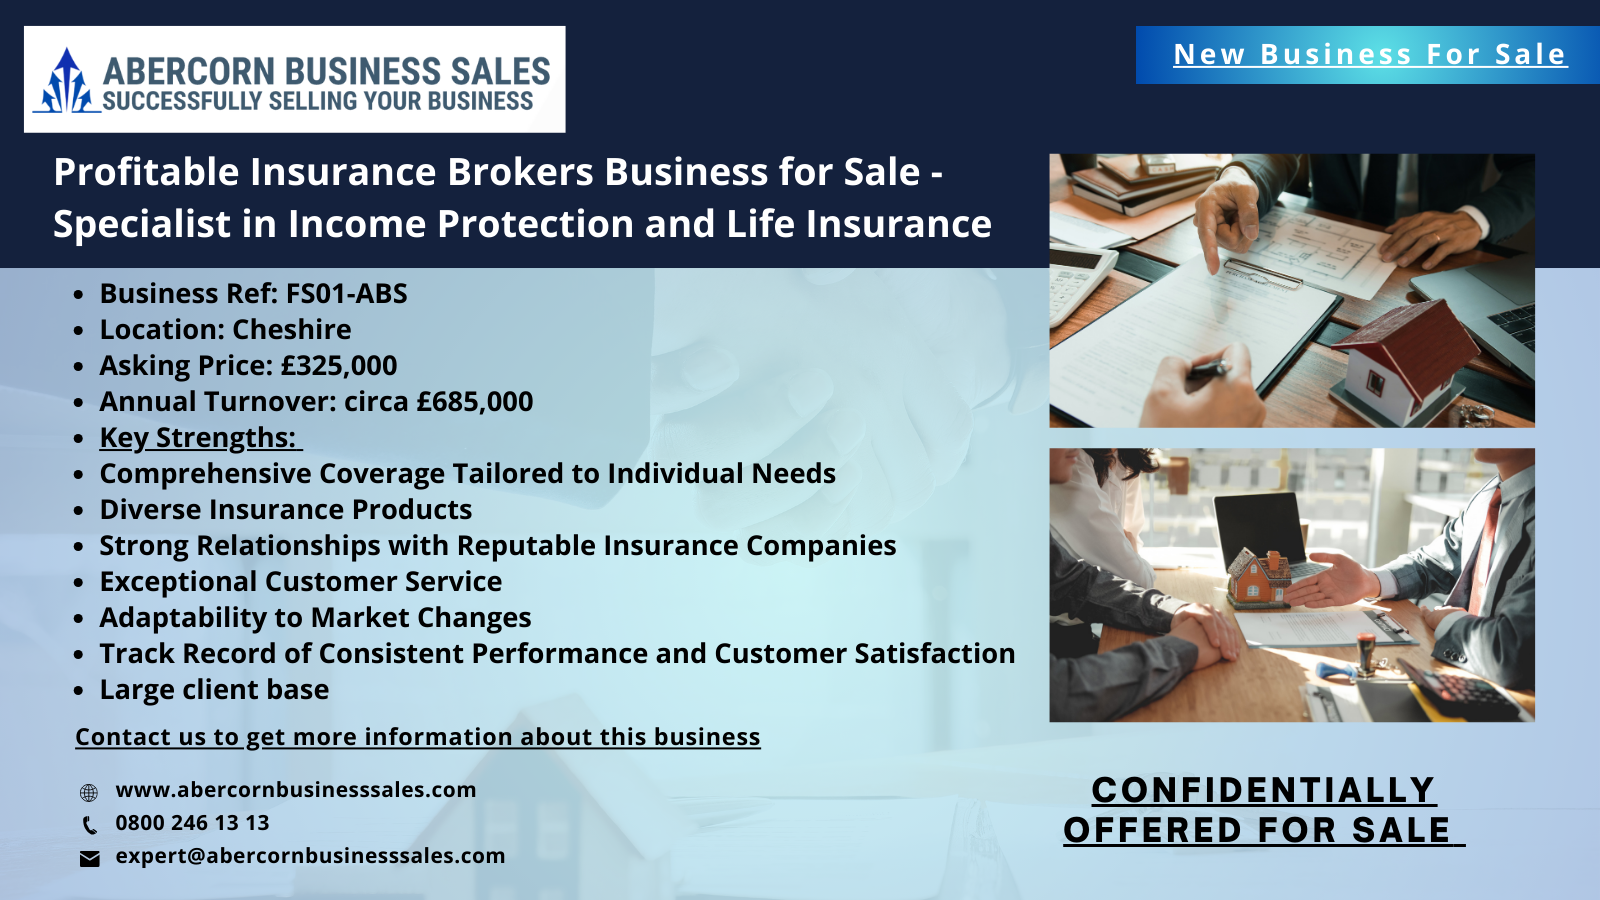 FS01-ABS - Profitable Insurance Brokers Business for Sale -Specialist in Income Protection and Life Insurance